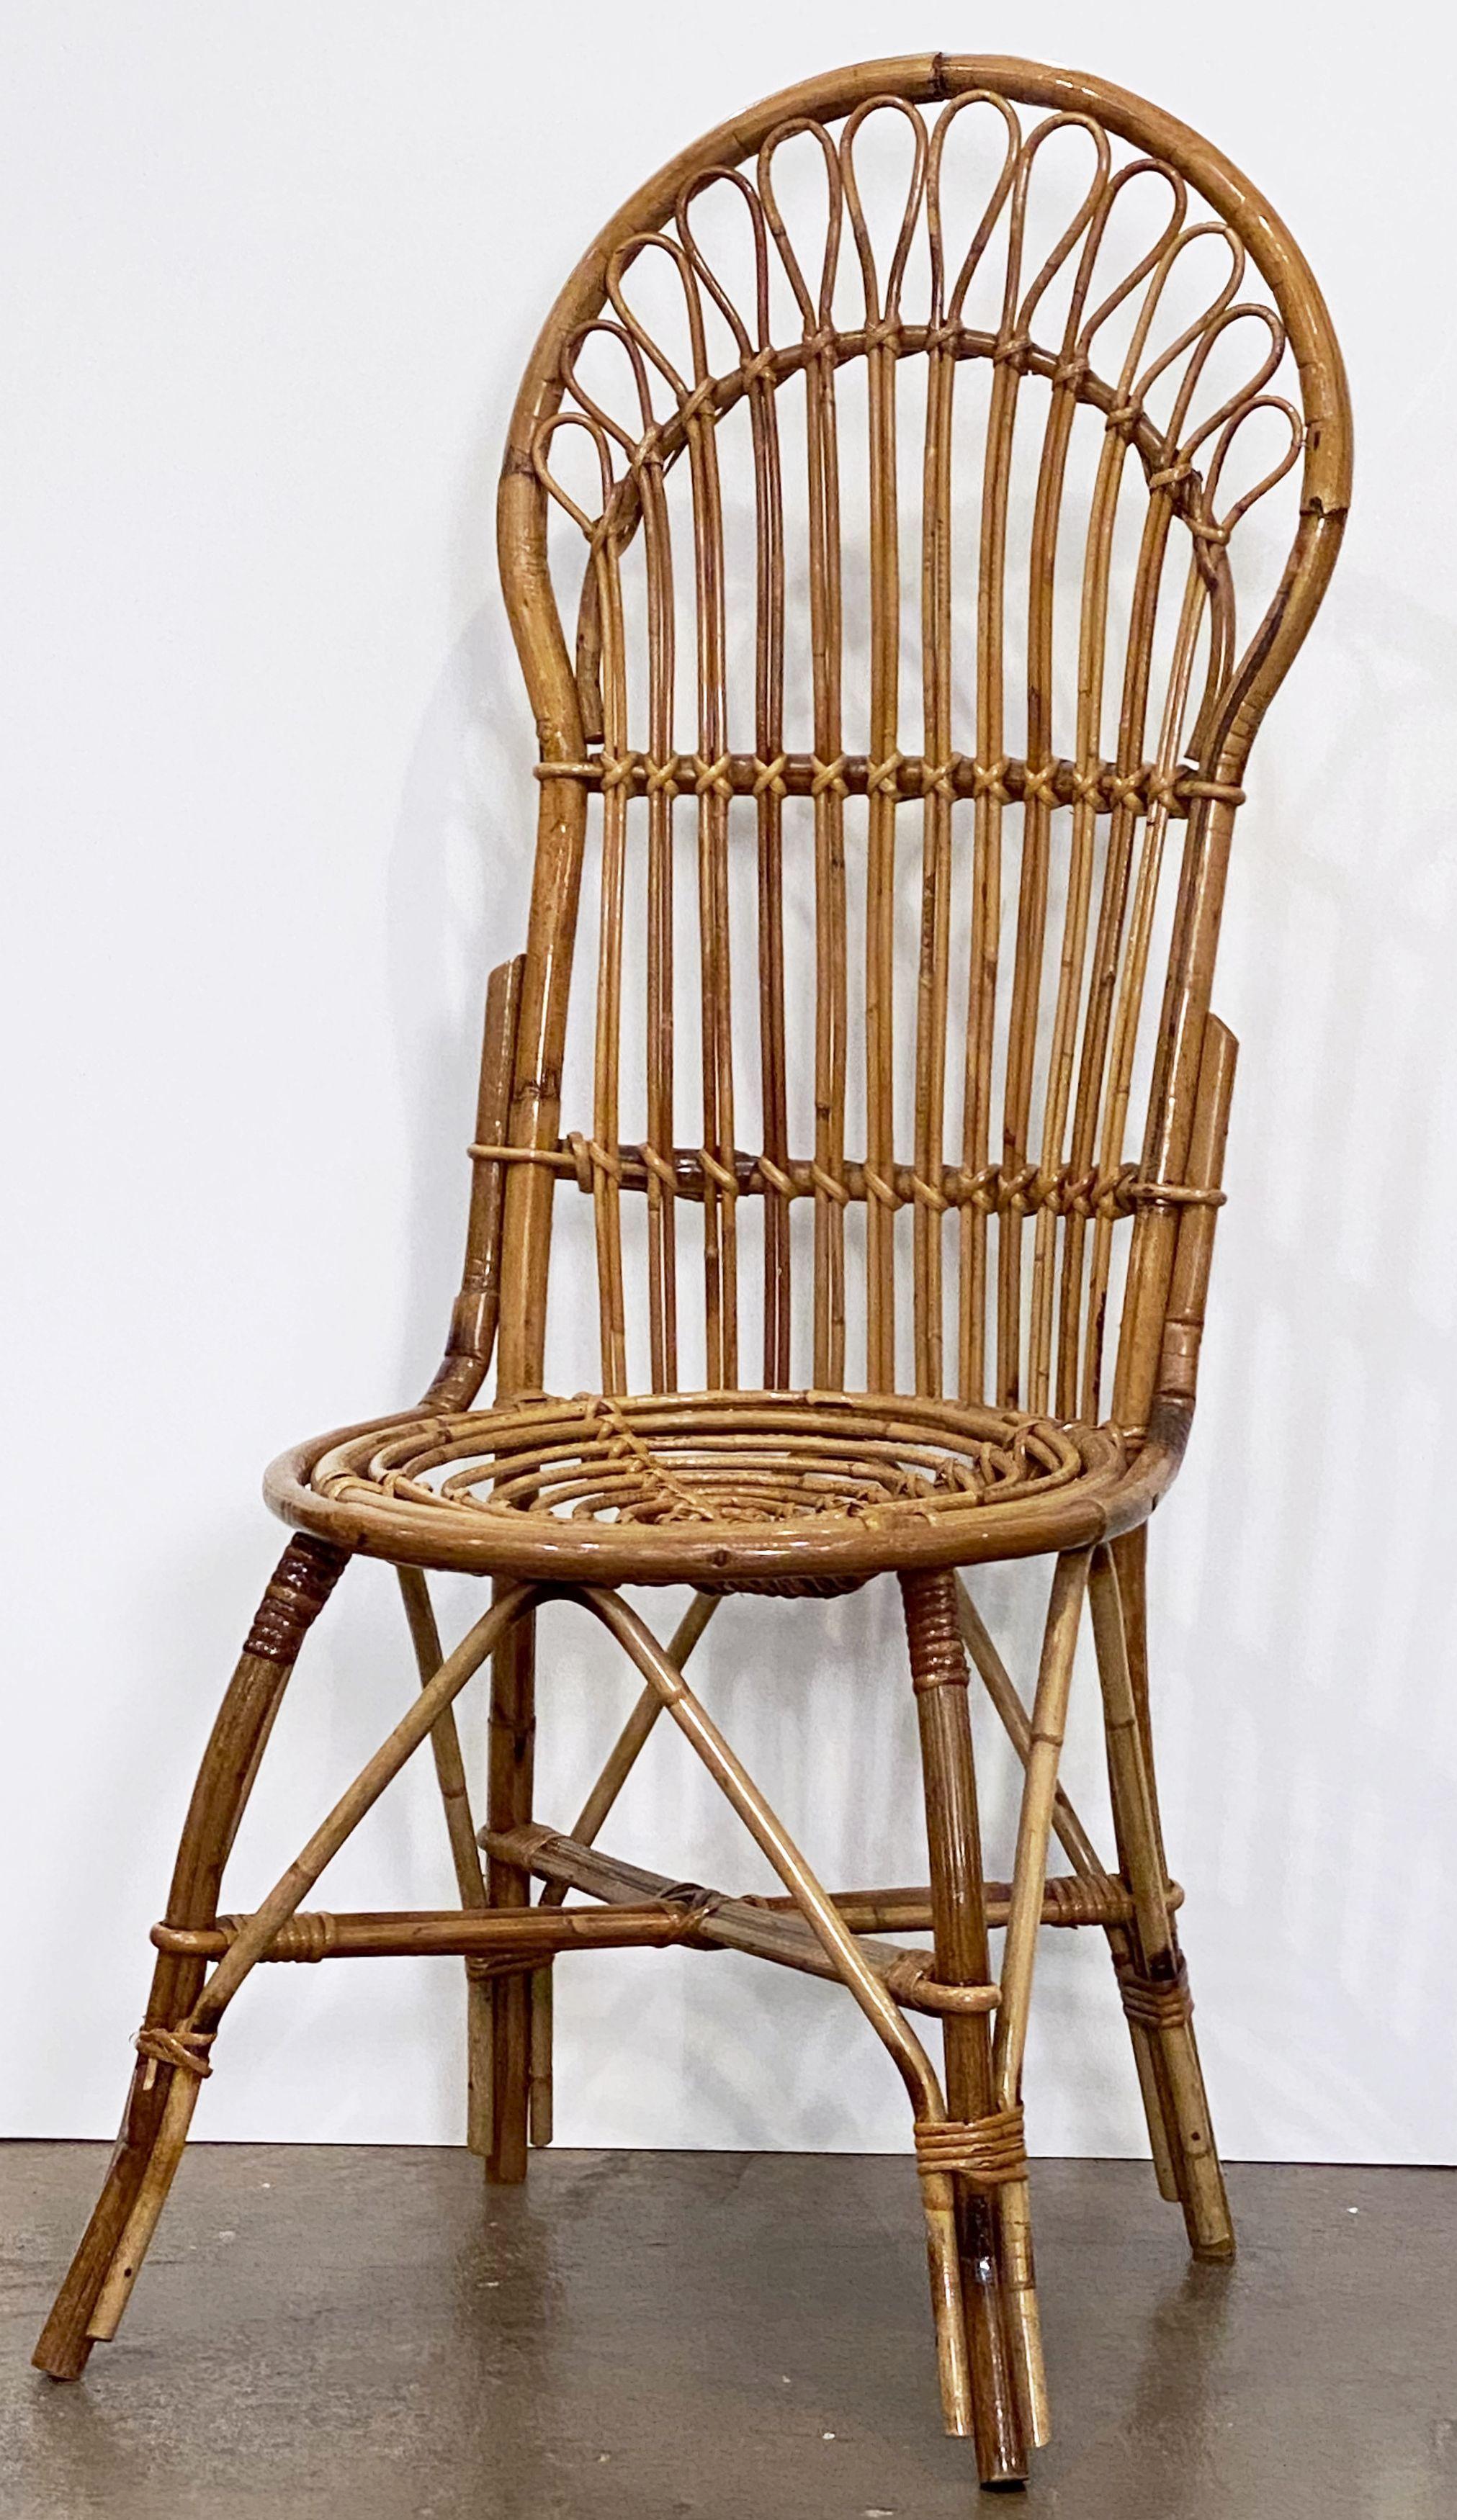 Italian Fan-Backed Chair of Rattan and Bamboo from the Mid-20th Century For Sale 1